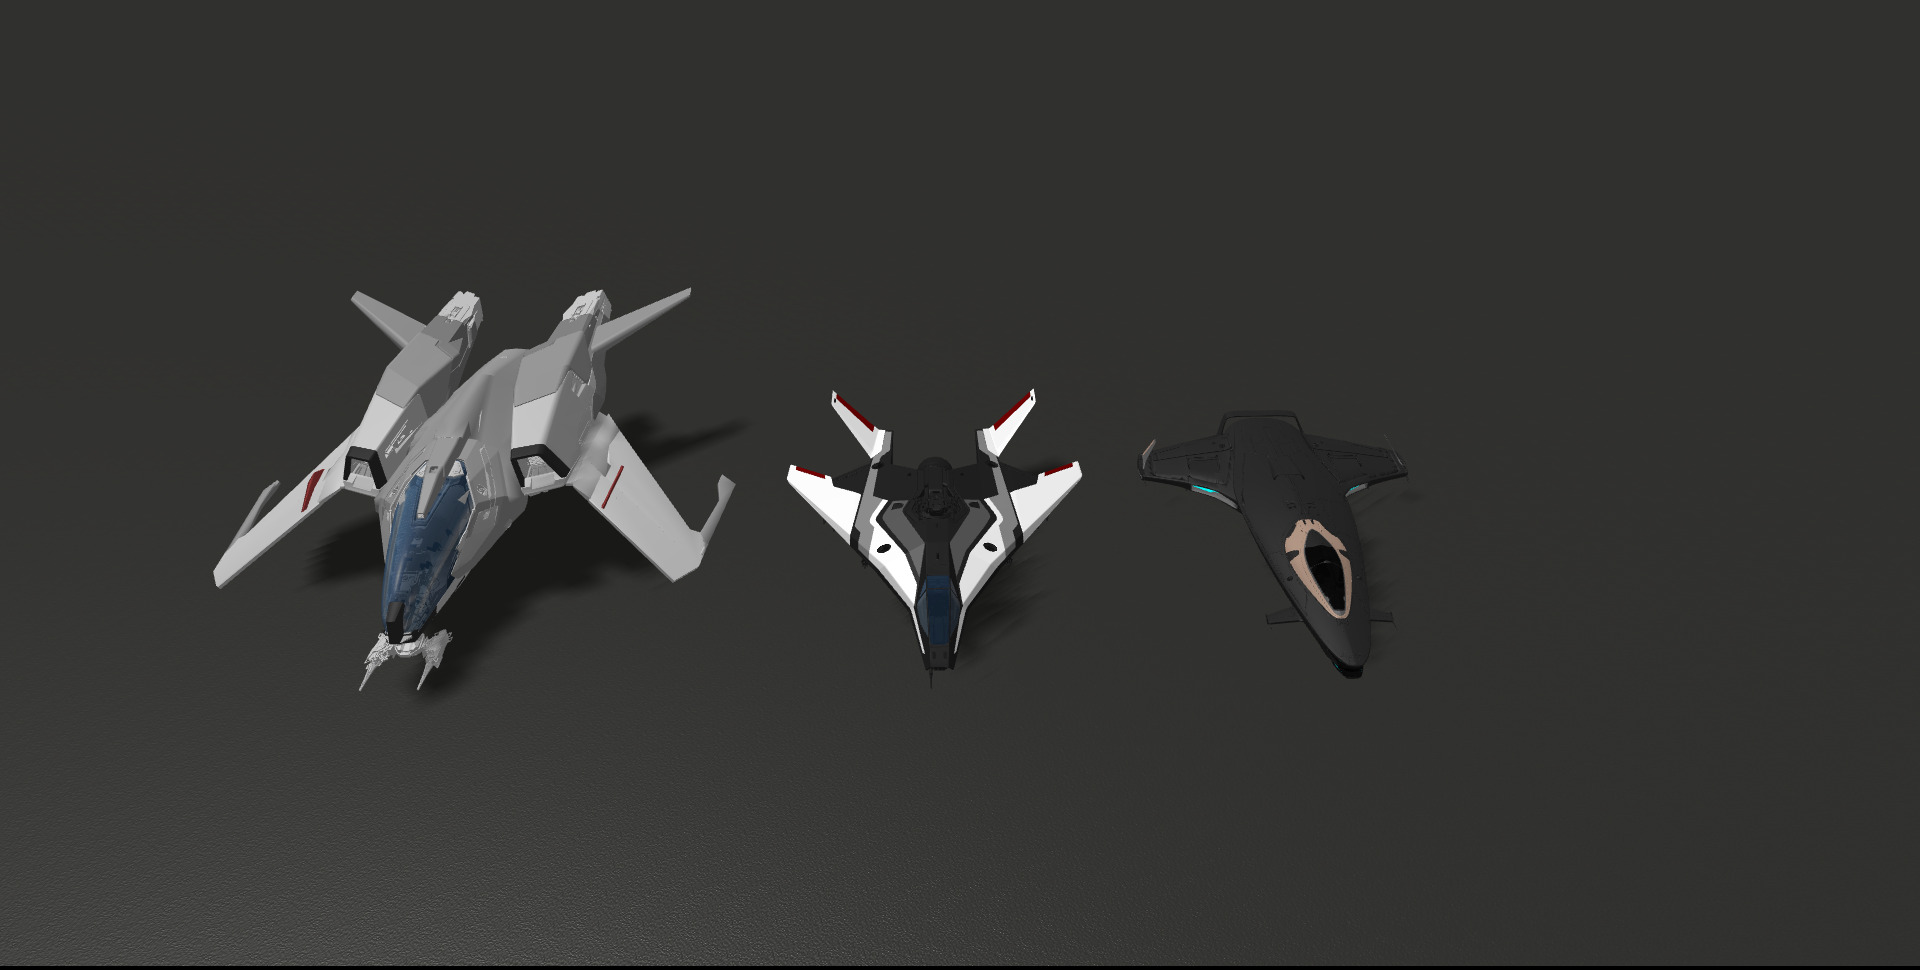 Likely Vanduul Fighter, possibly Glaive rework?